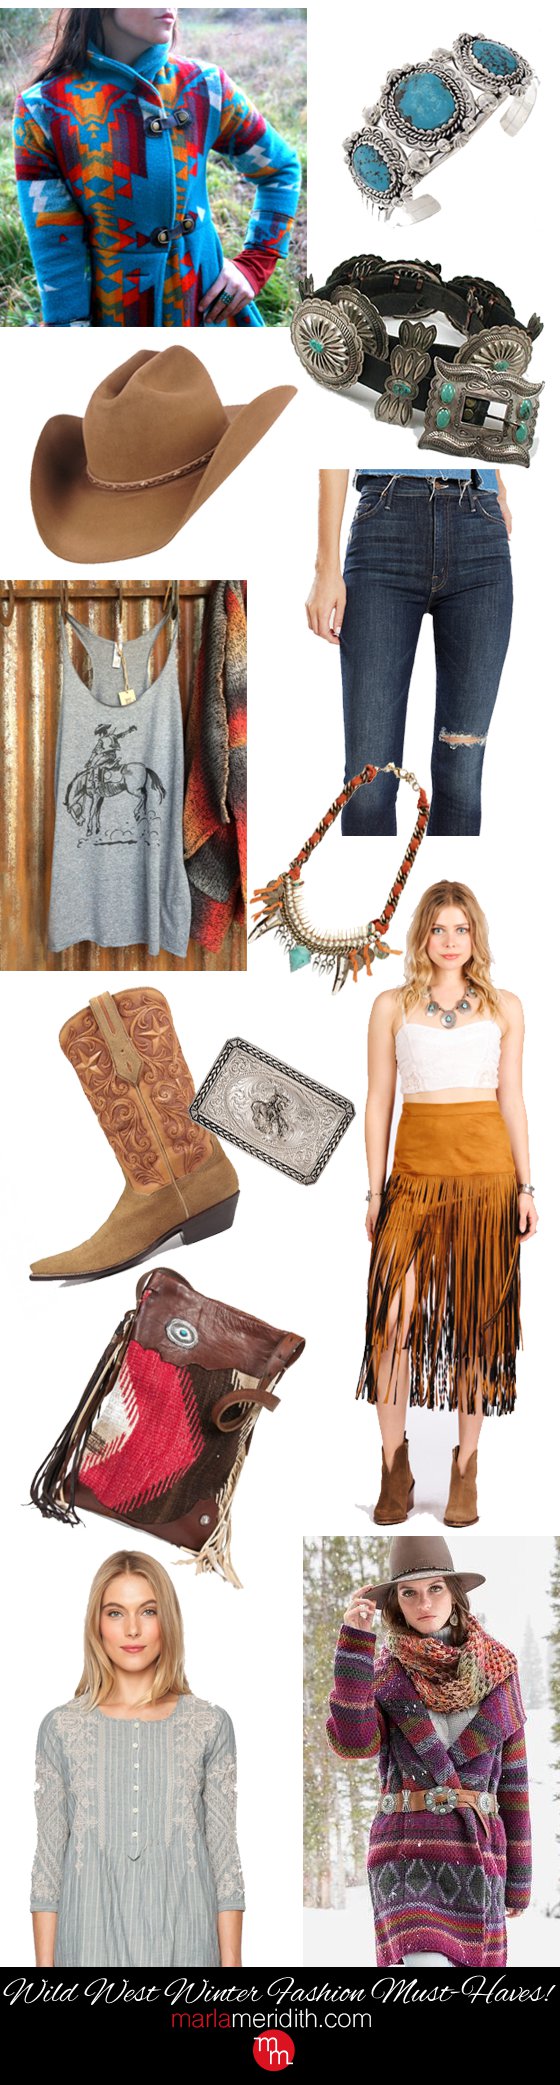 HOT & CHIC Wild West Winter Fashions worn in Telluride Colorado & famous ski towns everywhere! Great for Apres ski MarlaMeridith.com ( @marlameridith )